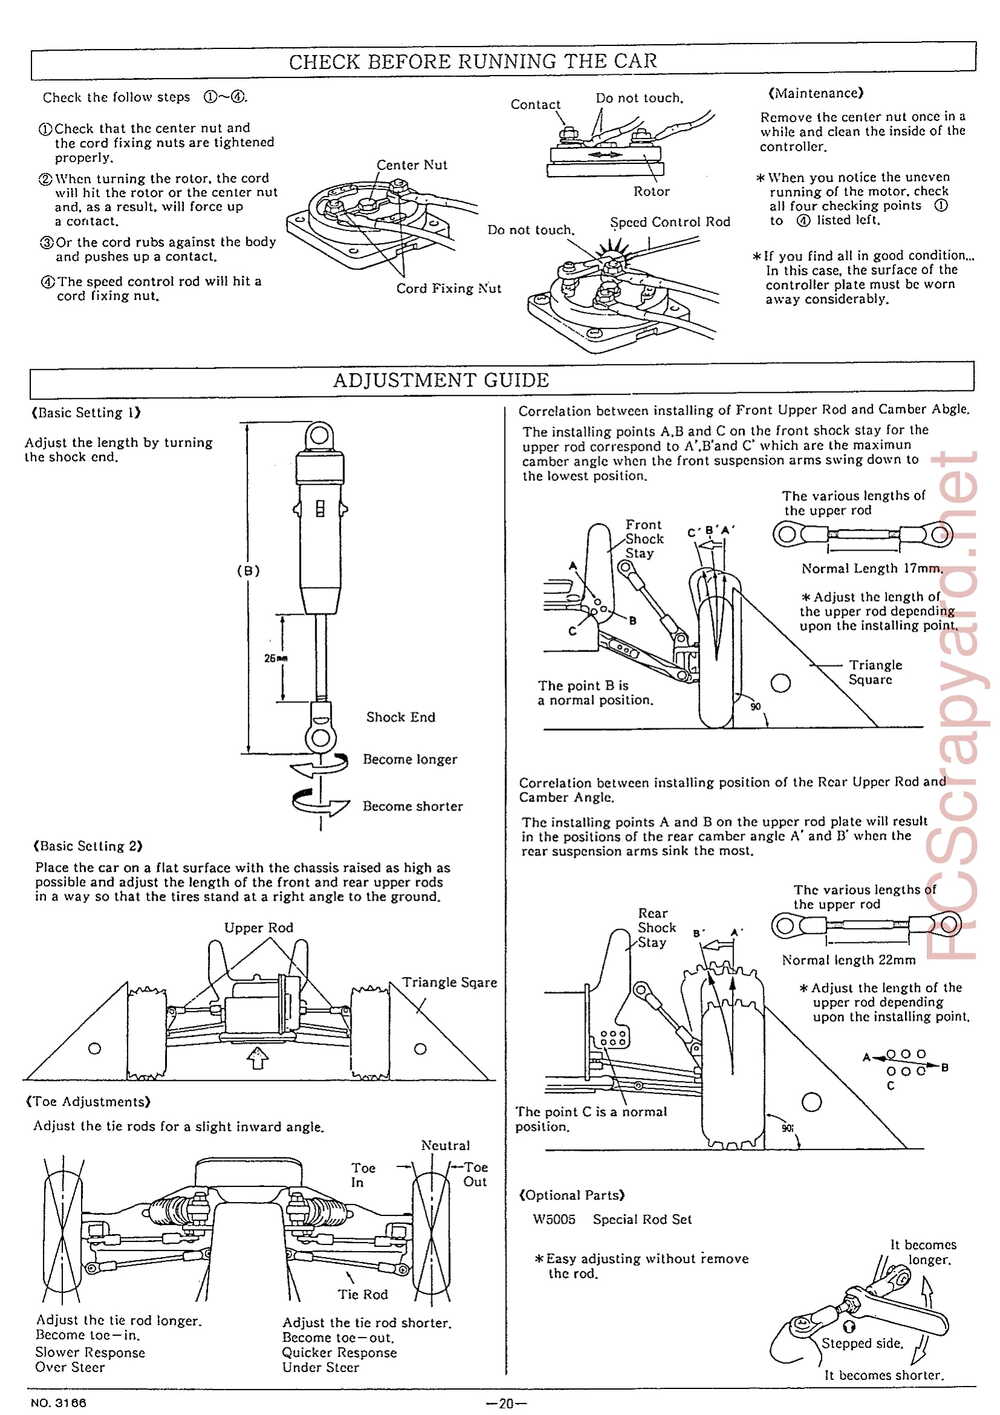 Kyosho - 3166 - Outlaw-Ultima Truck - Manual - Page 24